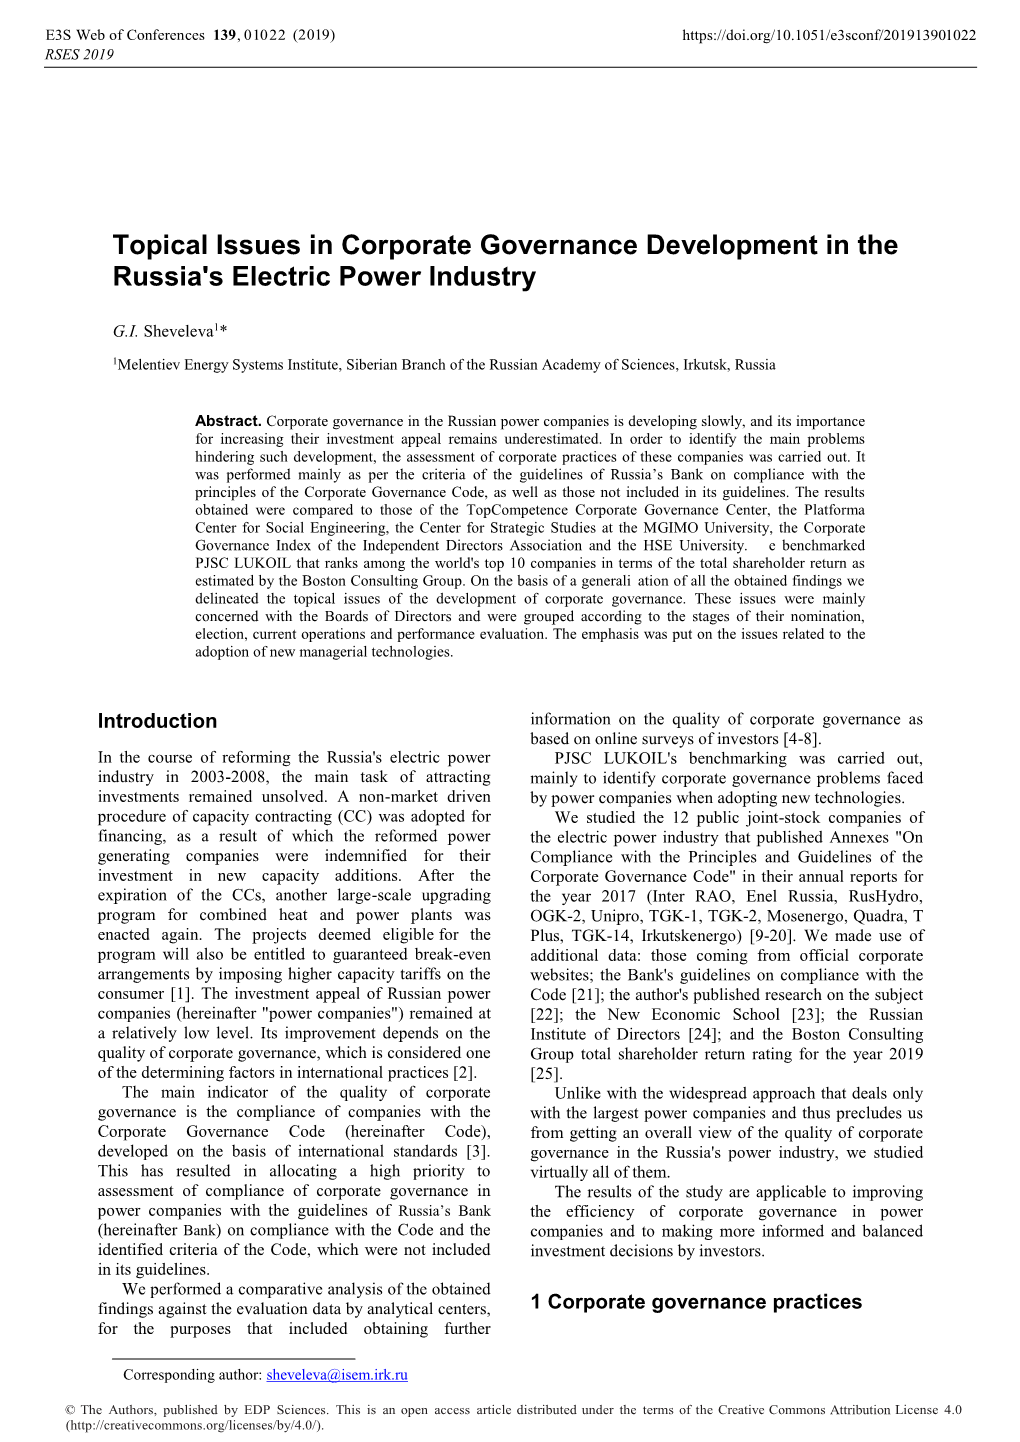 Topical Issues in Corporate Governance Development in the Russia's Electric Power Industry